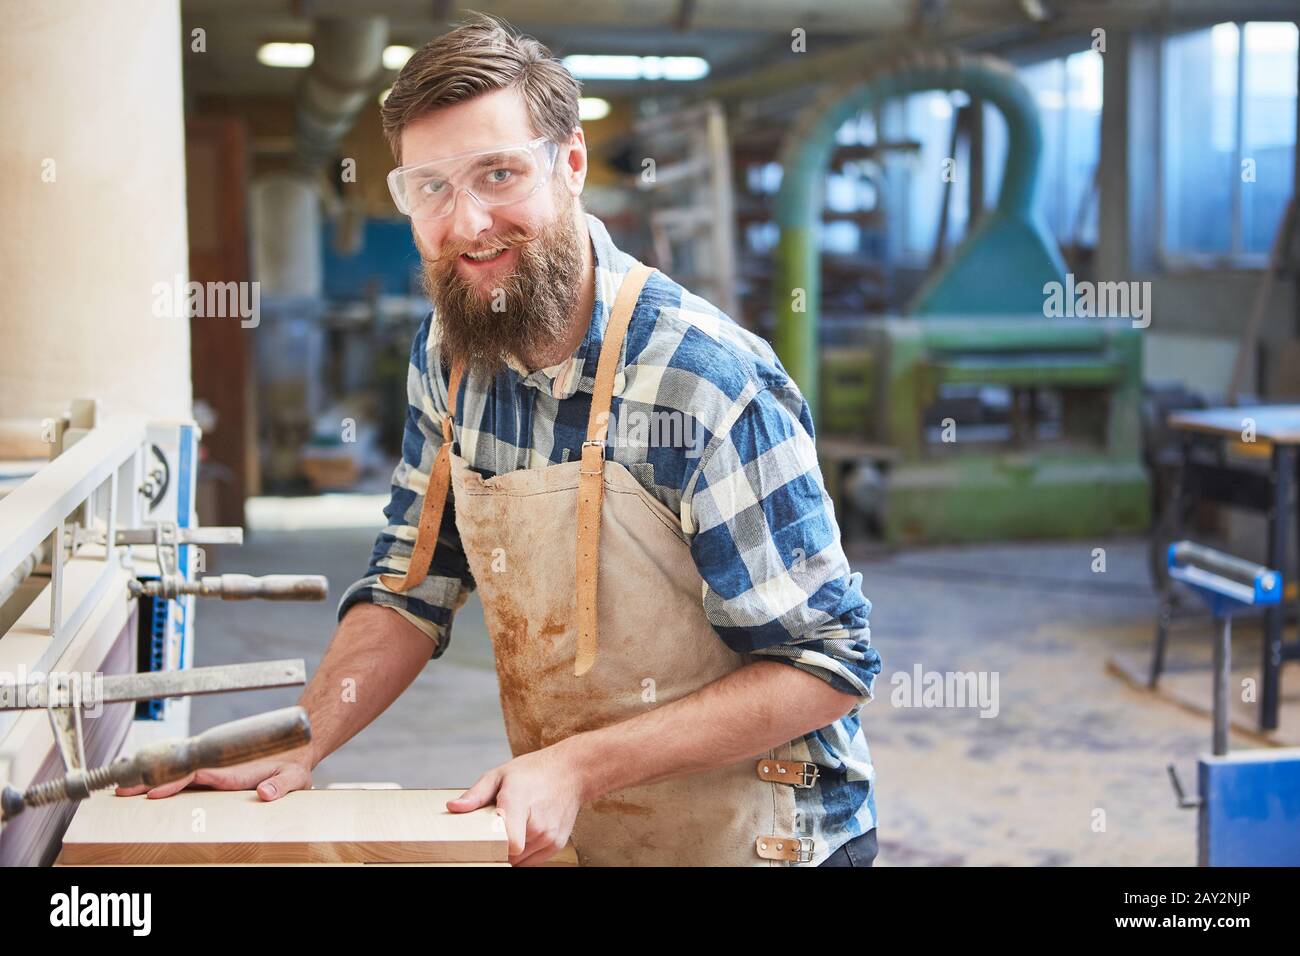 Hipster carpenter with a beard as a furniture maker works with wood on the grinding machine Stock Photo